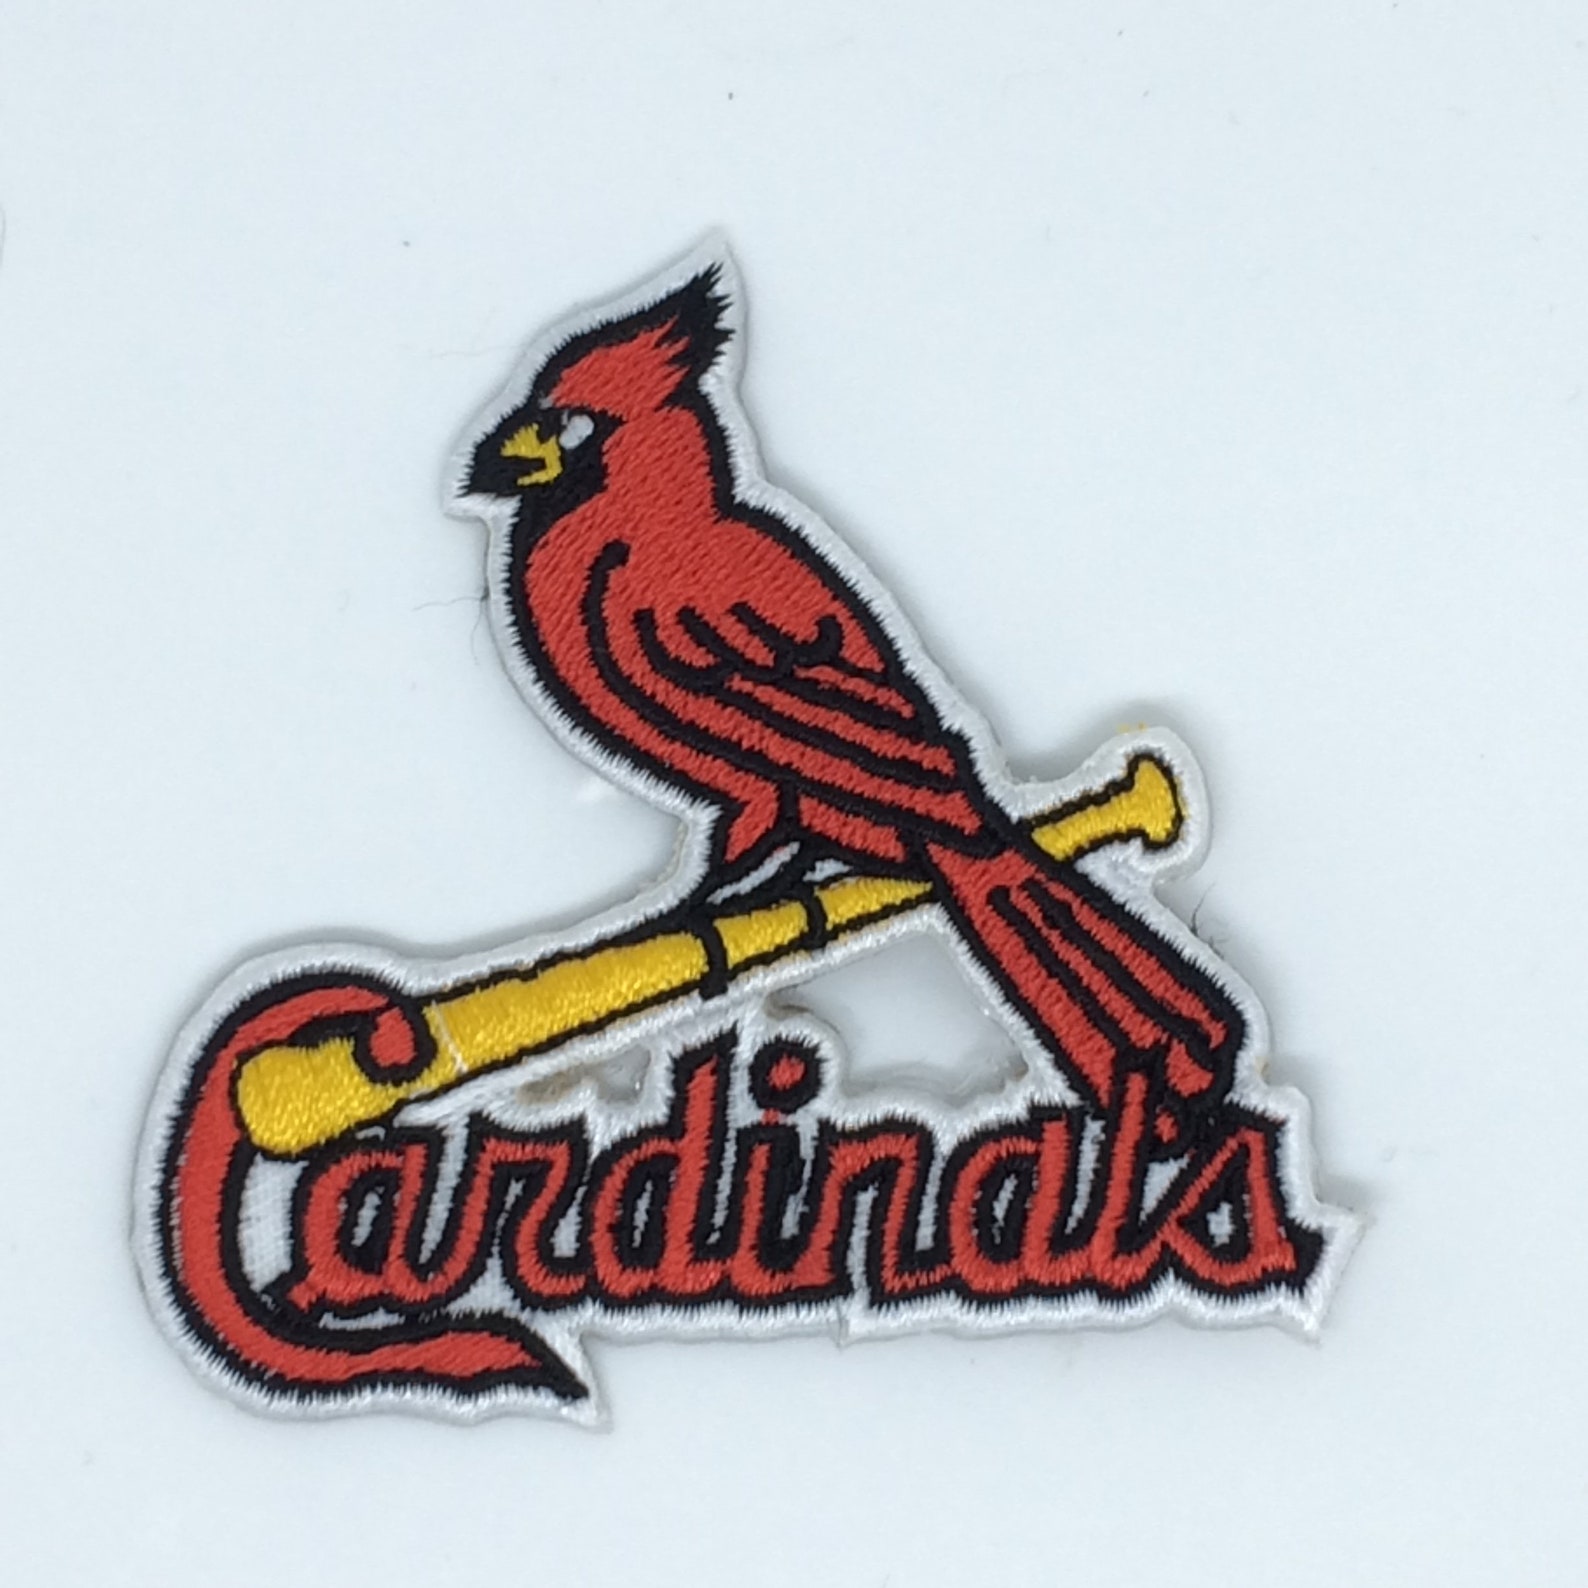 St. Louis Cardinals Baseball Embroidered Iron on Patch | Etsy